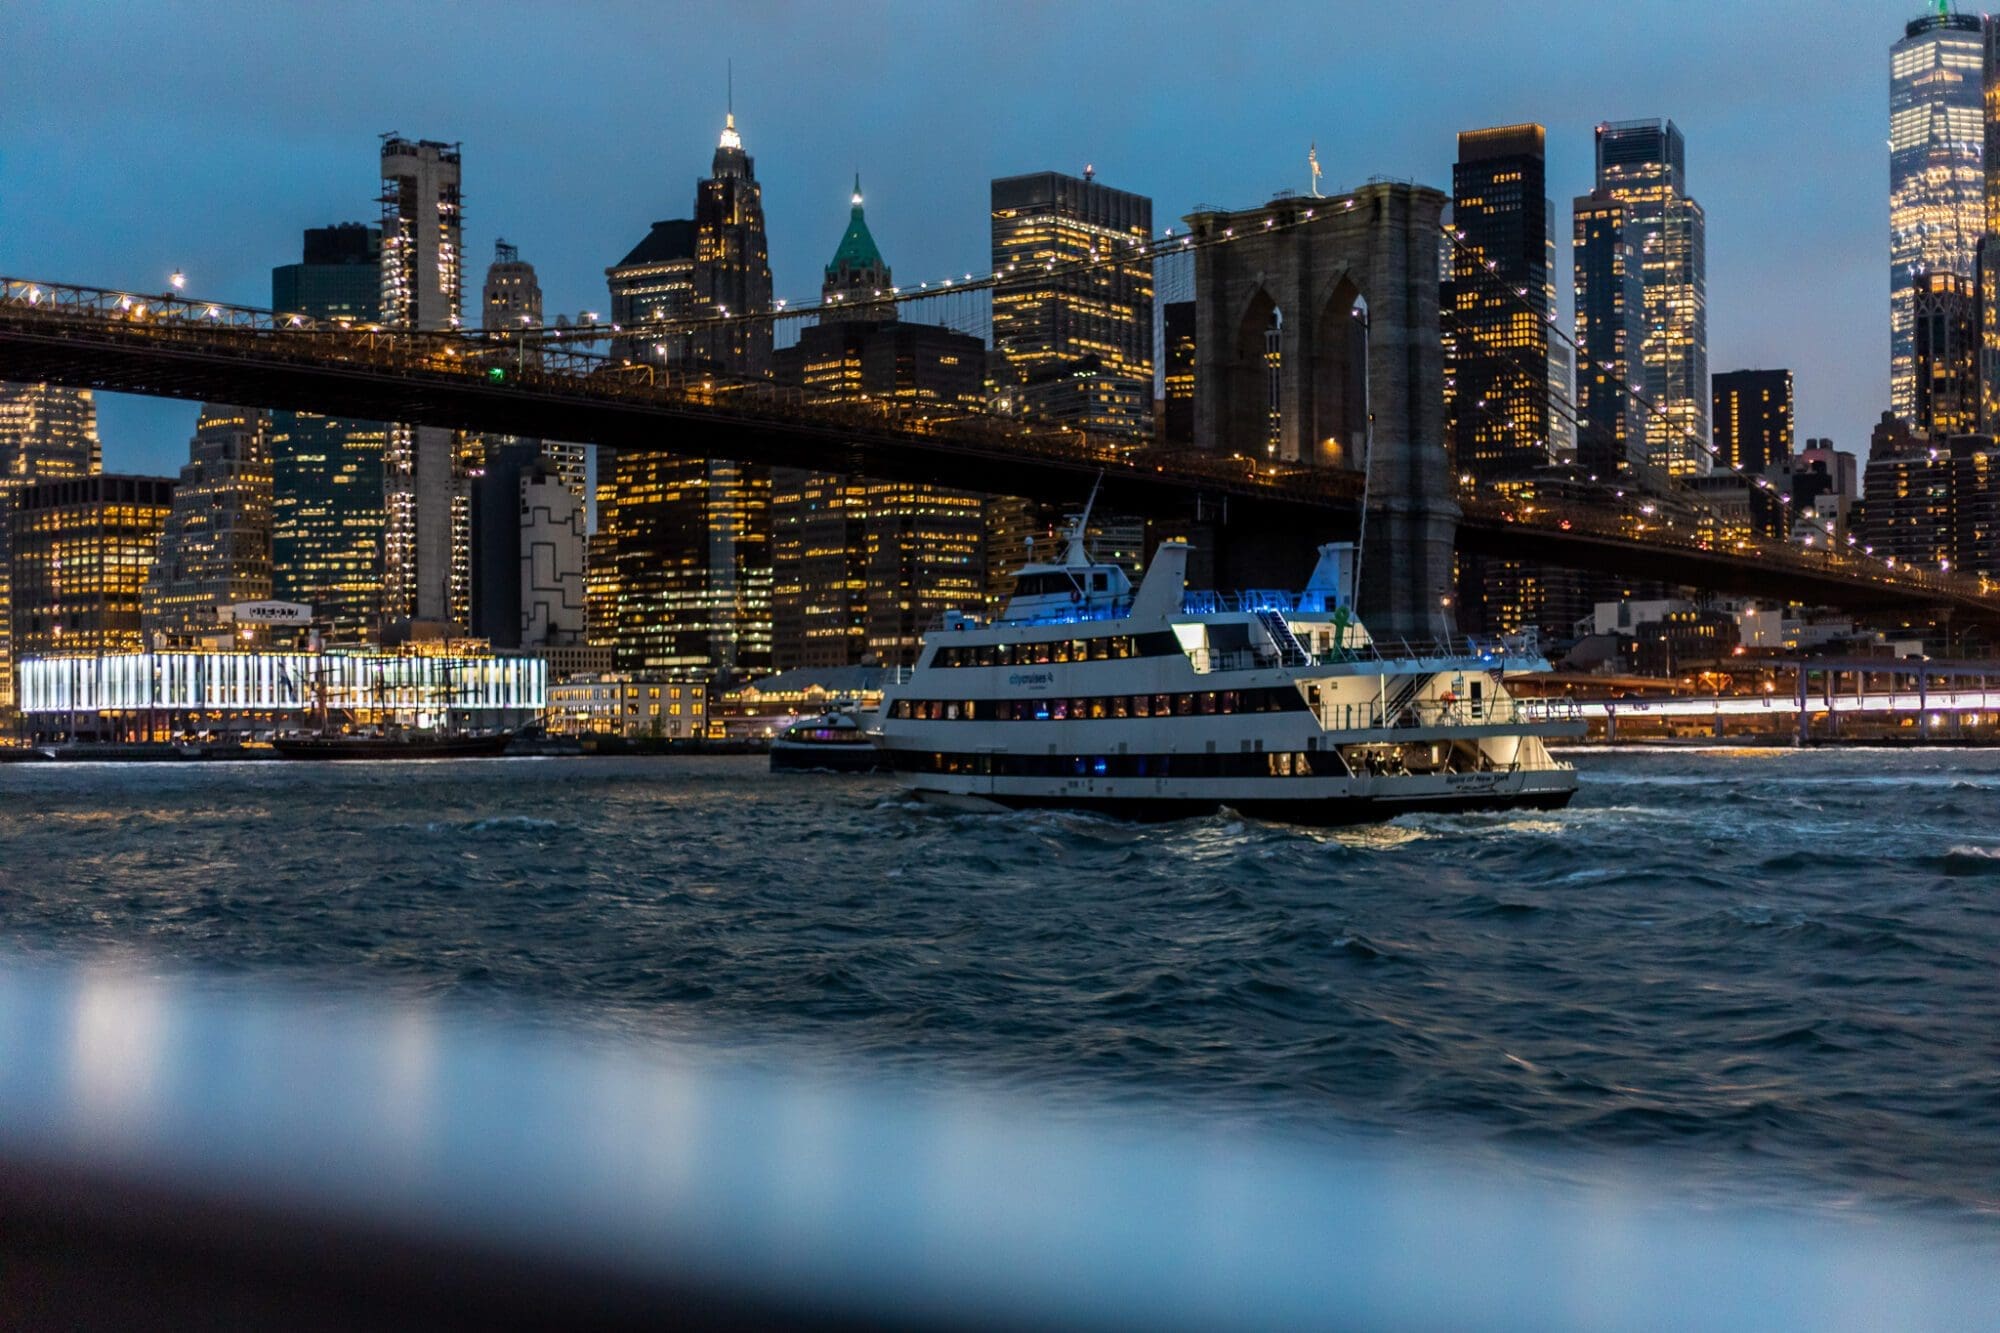 Circle Line Sightseeing Cruise Review Things to do in New York